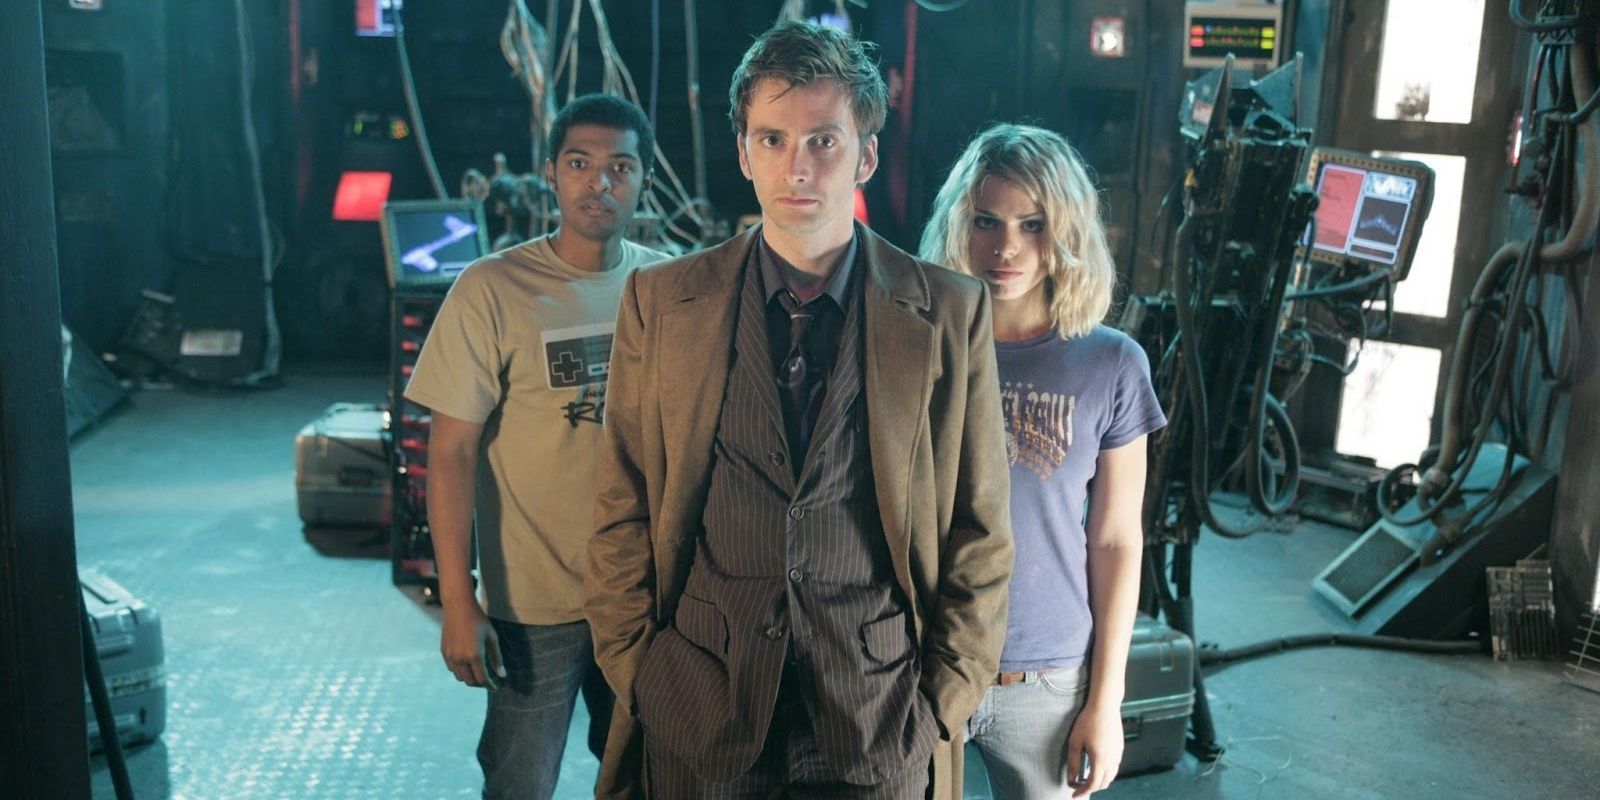 The Tenth Doctor explores the SS Madame De Pompadour with Rose Tyler and Mickey Smith in Doctor Who.